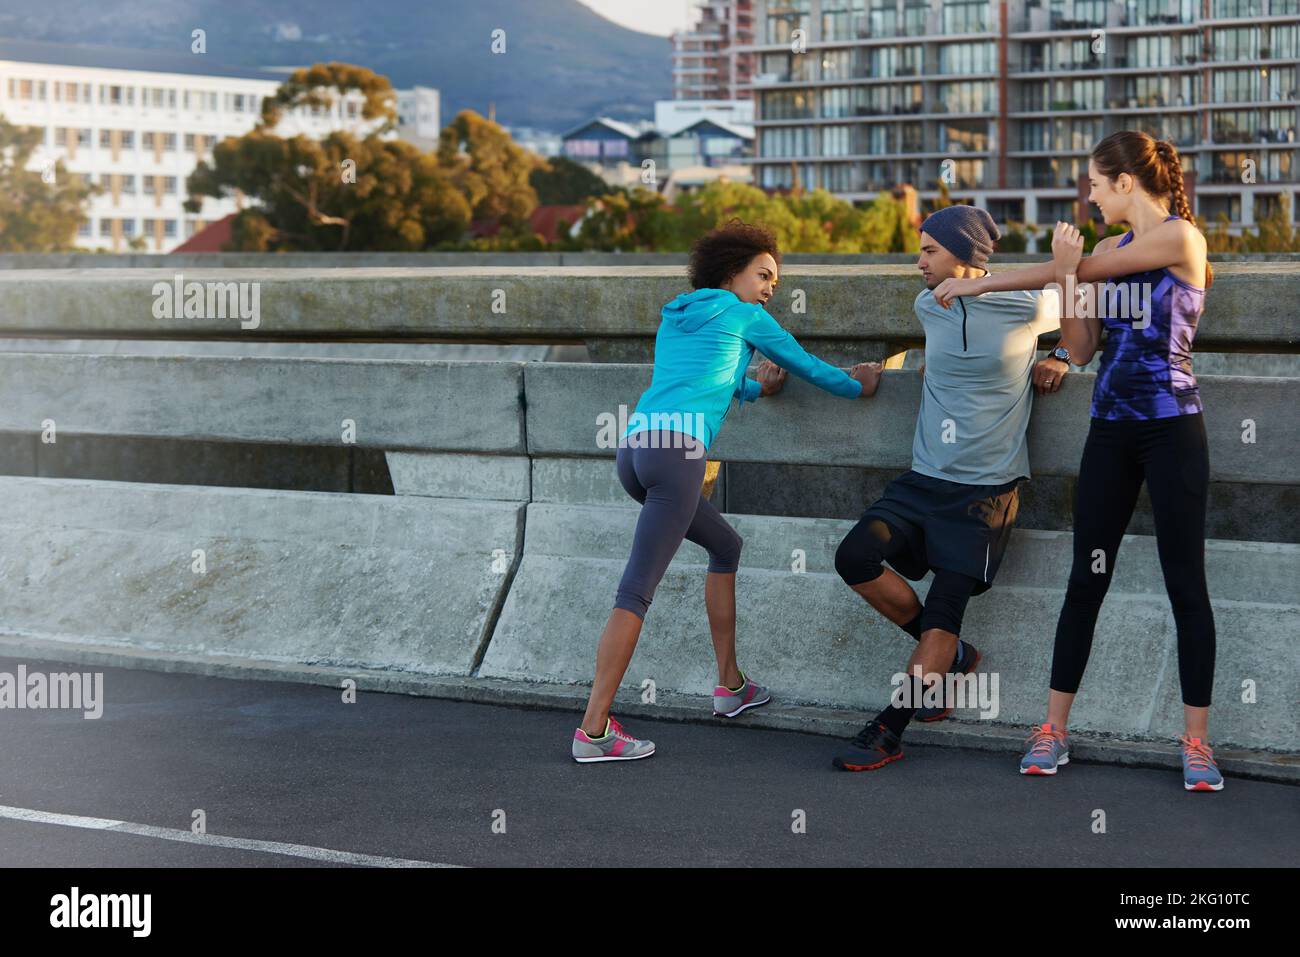 Stetching before their morning run. three friends stretching at the road side before a morning jog. Stock Photo